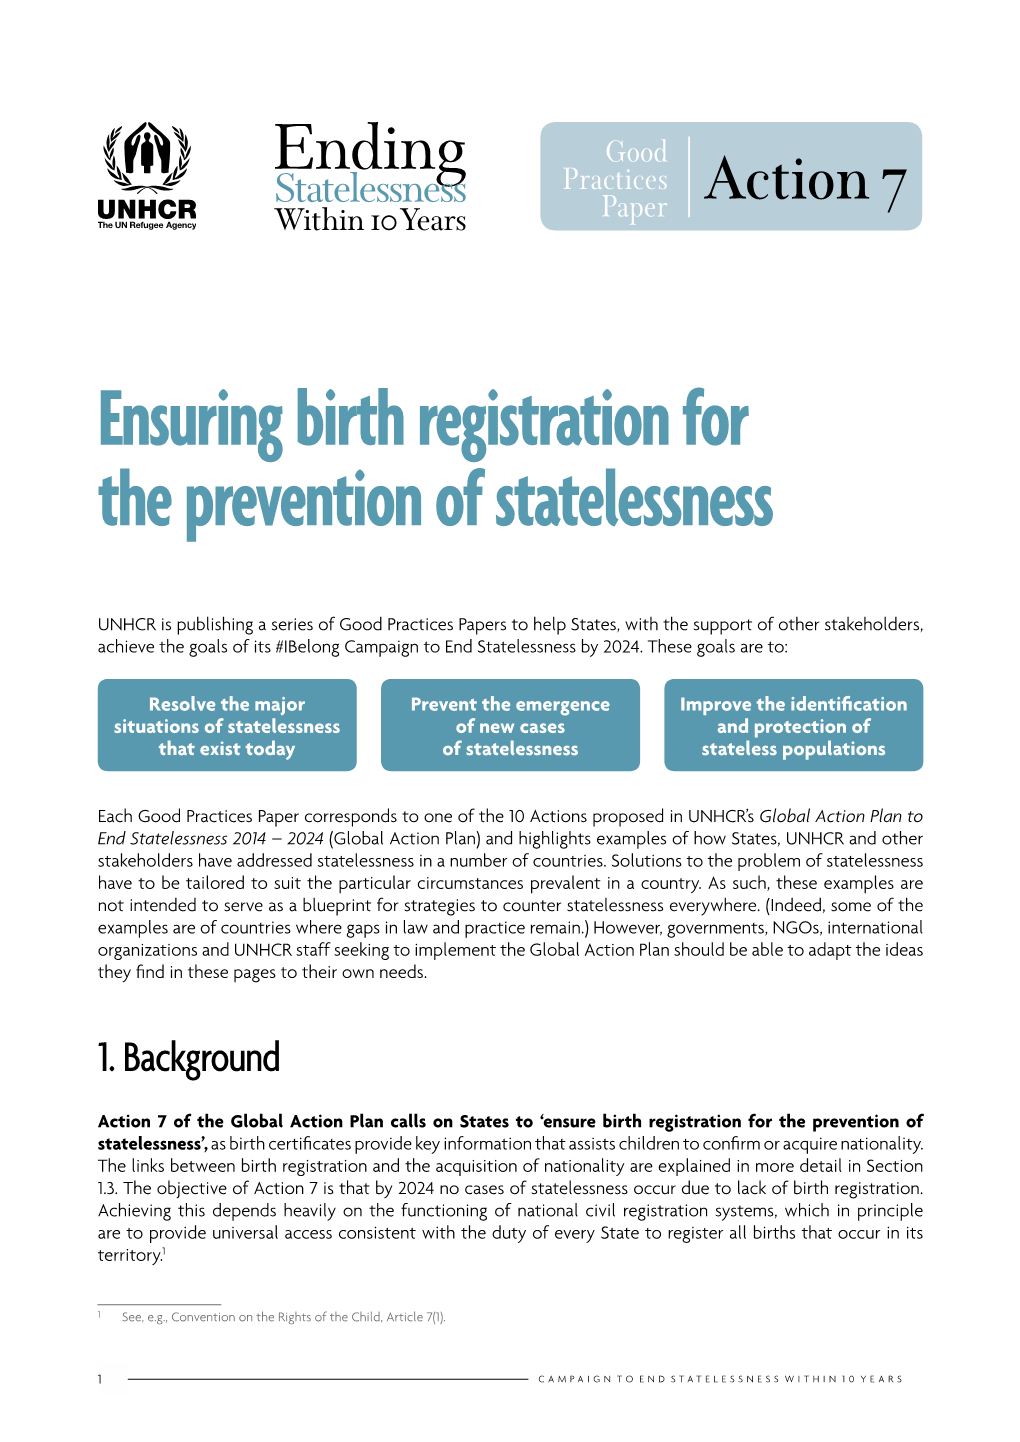 Ensuring Birth Registration for the Prevention of Statelessness